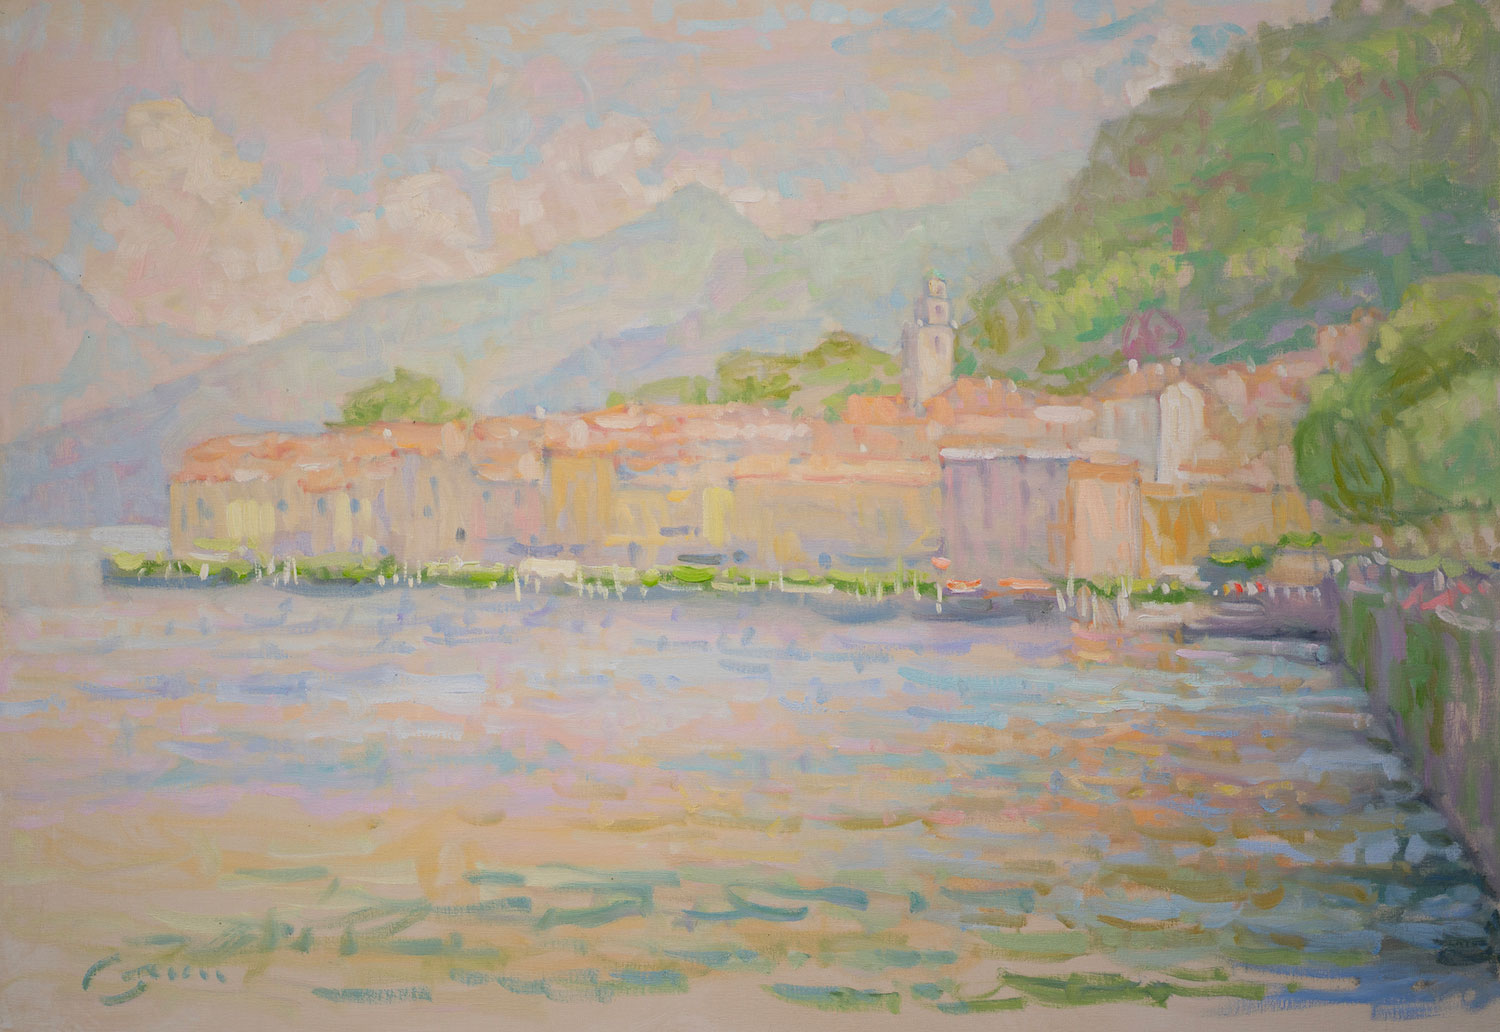 Oil painting of Bellagio, Lake Como, Italy, by Jerry Fresia